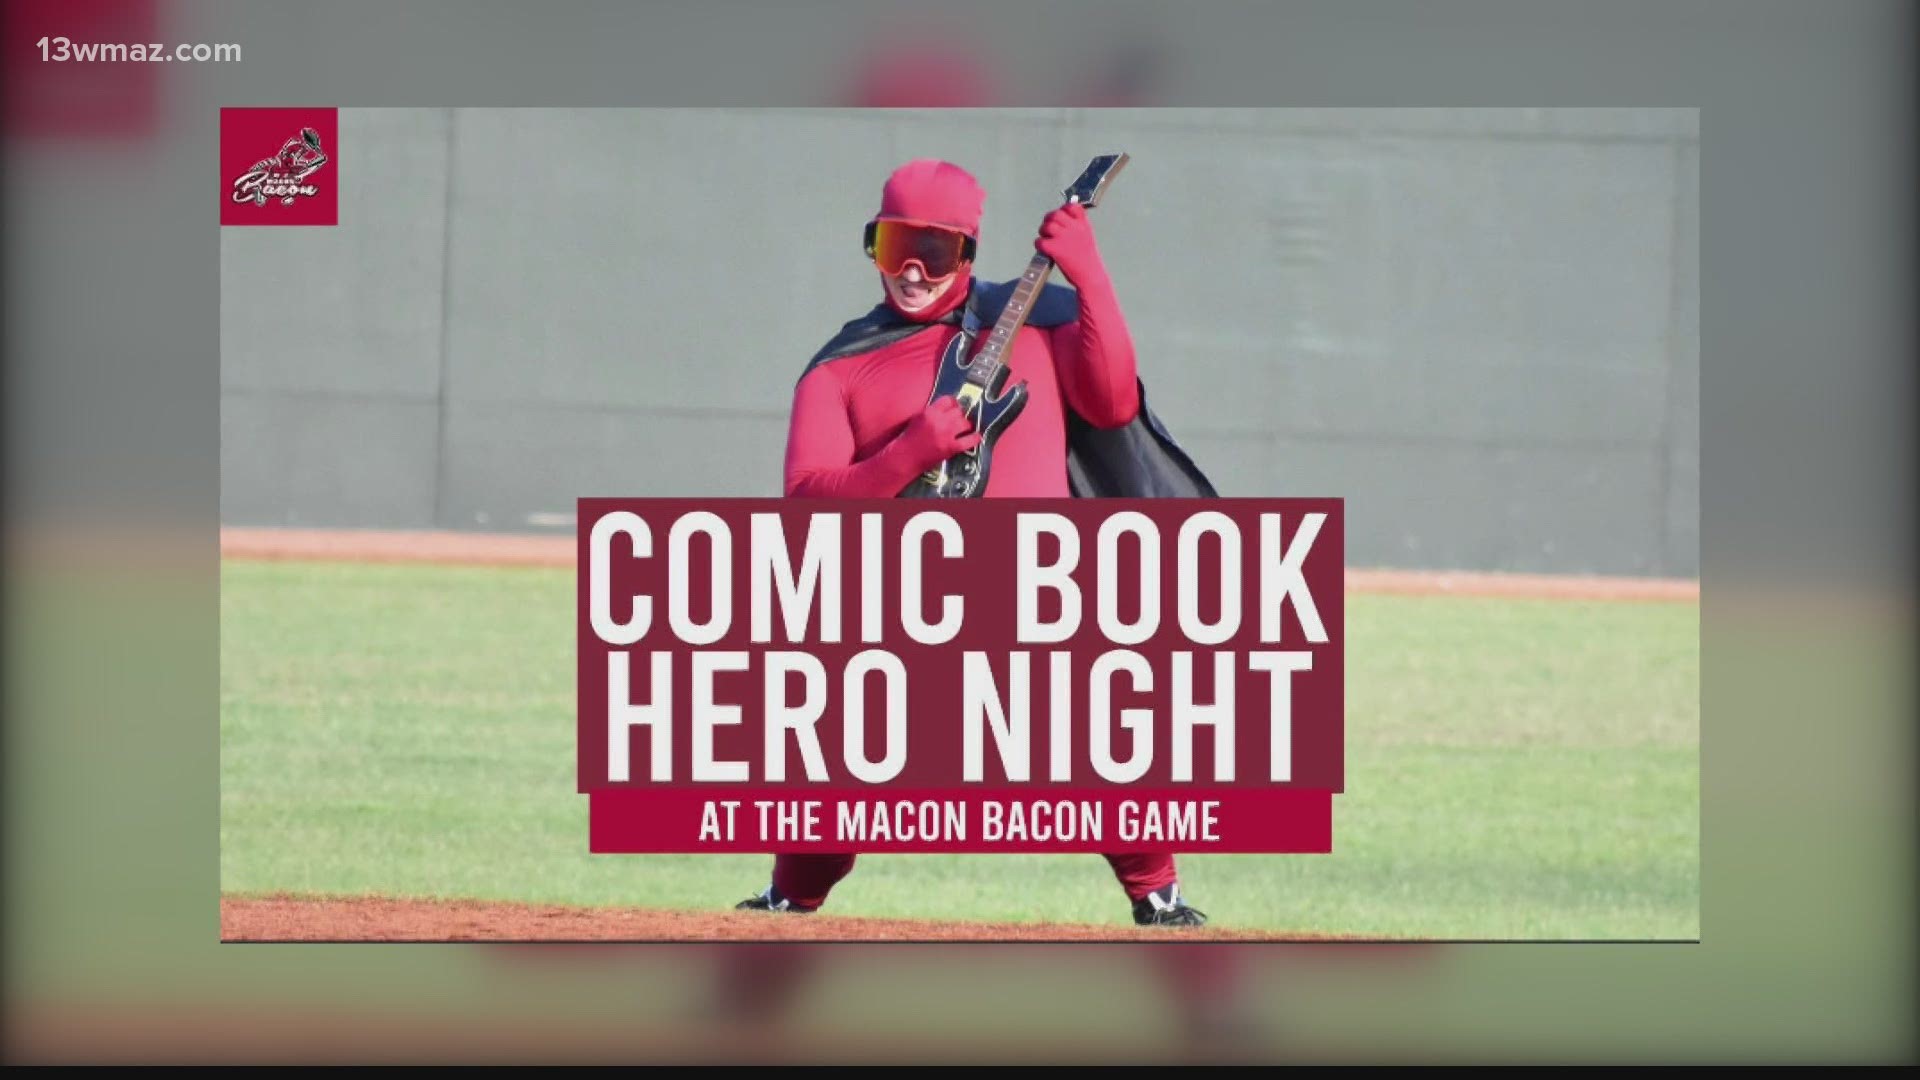 Folks are encouraged to dress up in their favorite superhero outfits and enjoy a great night of baseball